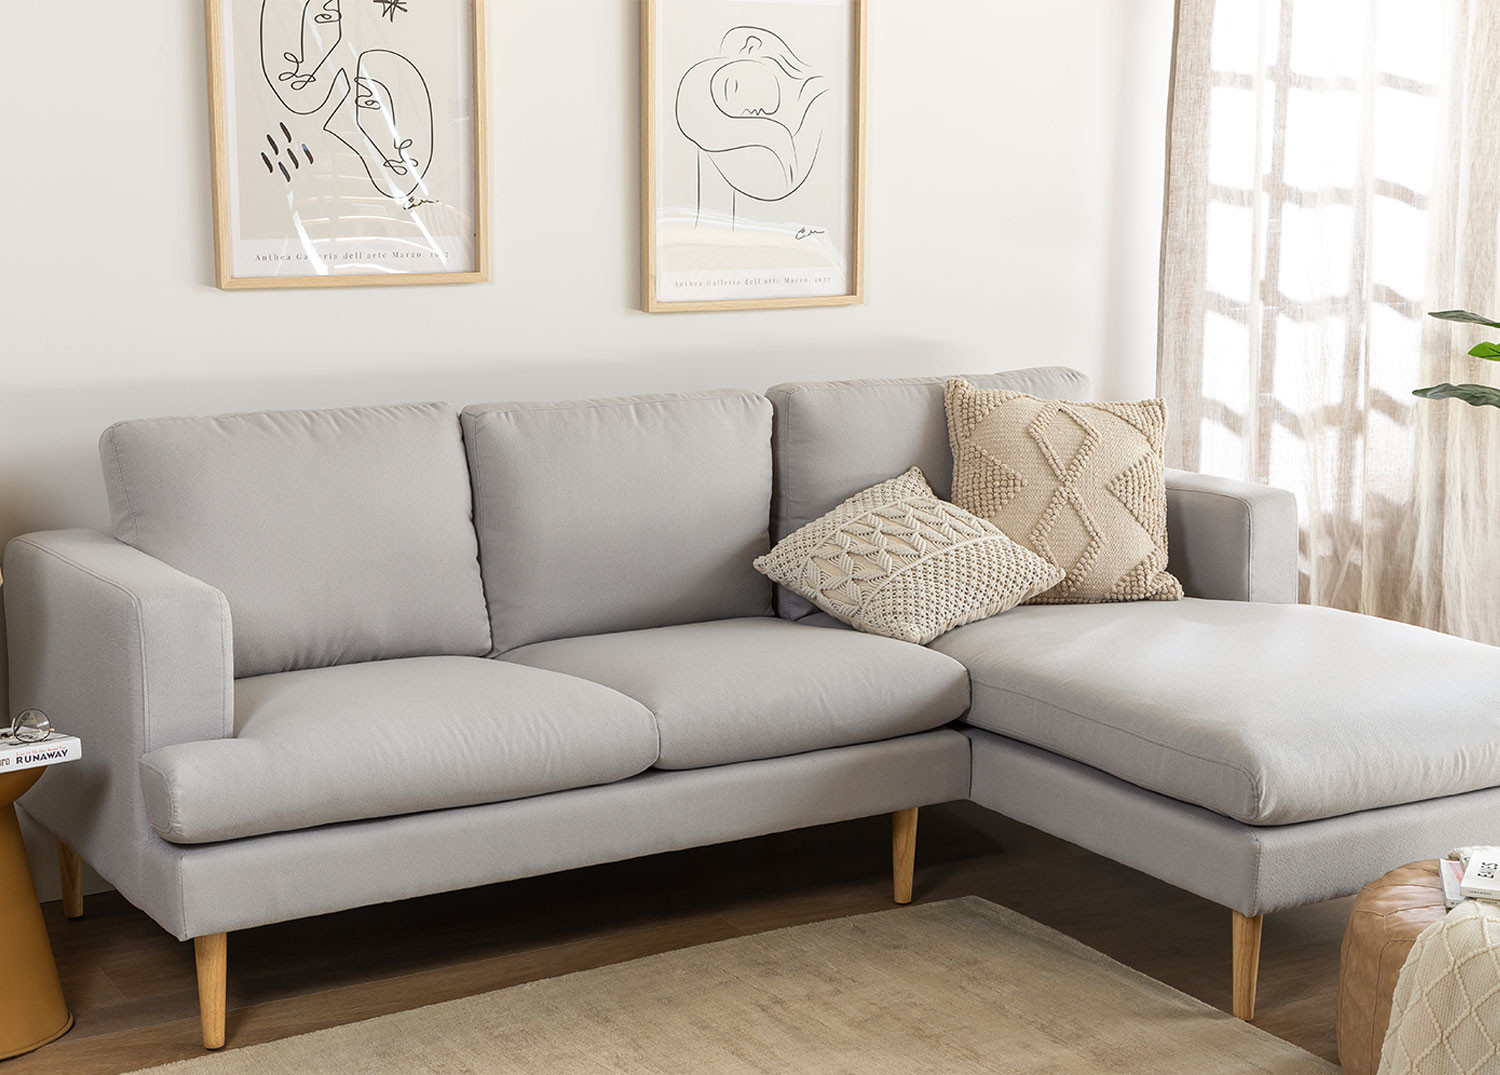 3 Seater Sofa Chaise Longue In Arnold, Grey Sofa Chaise Lounge